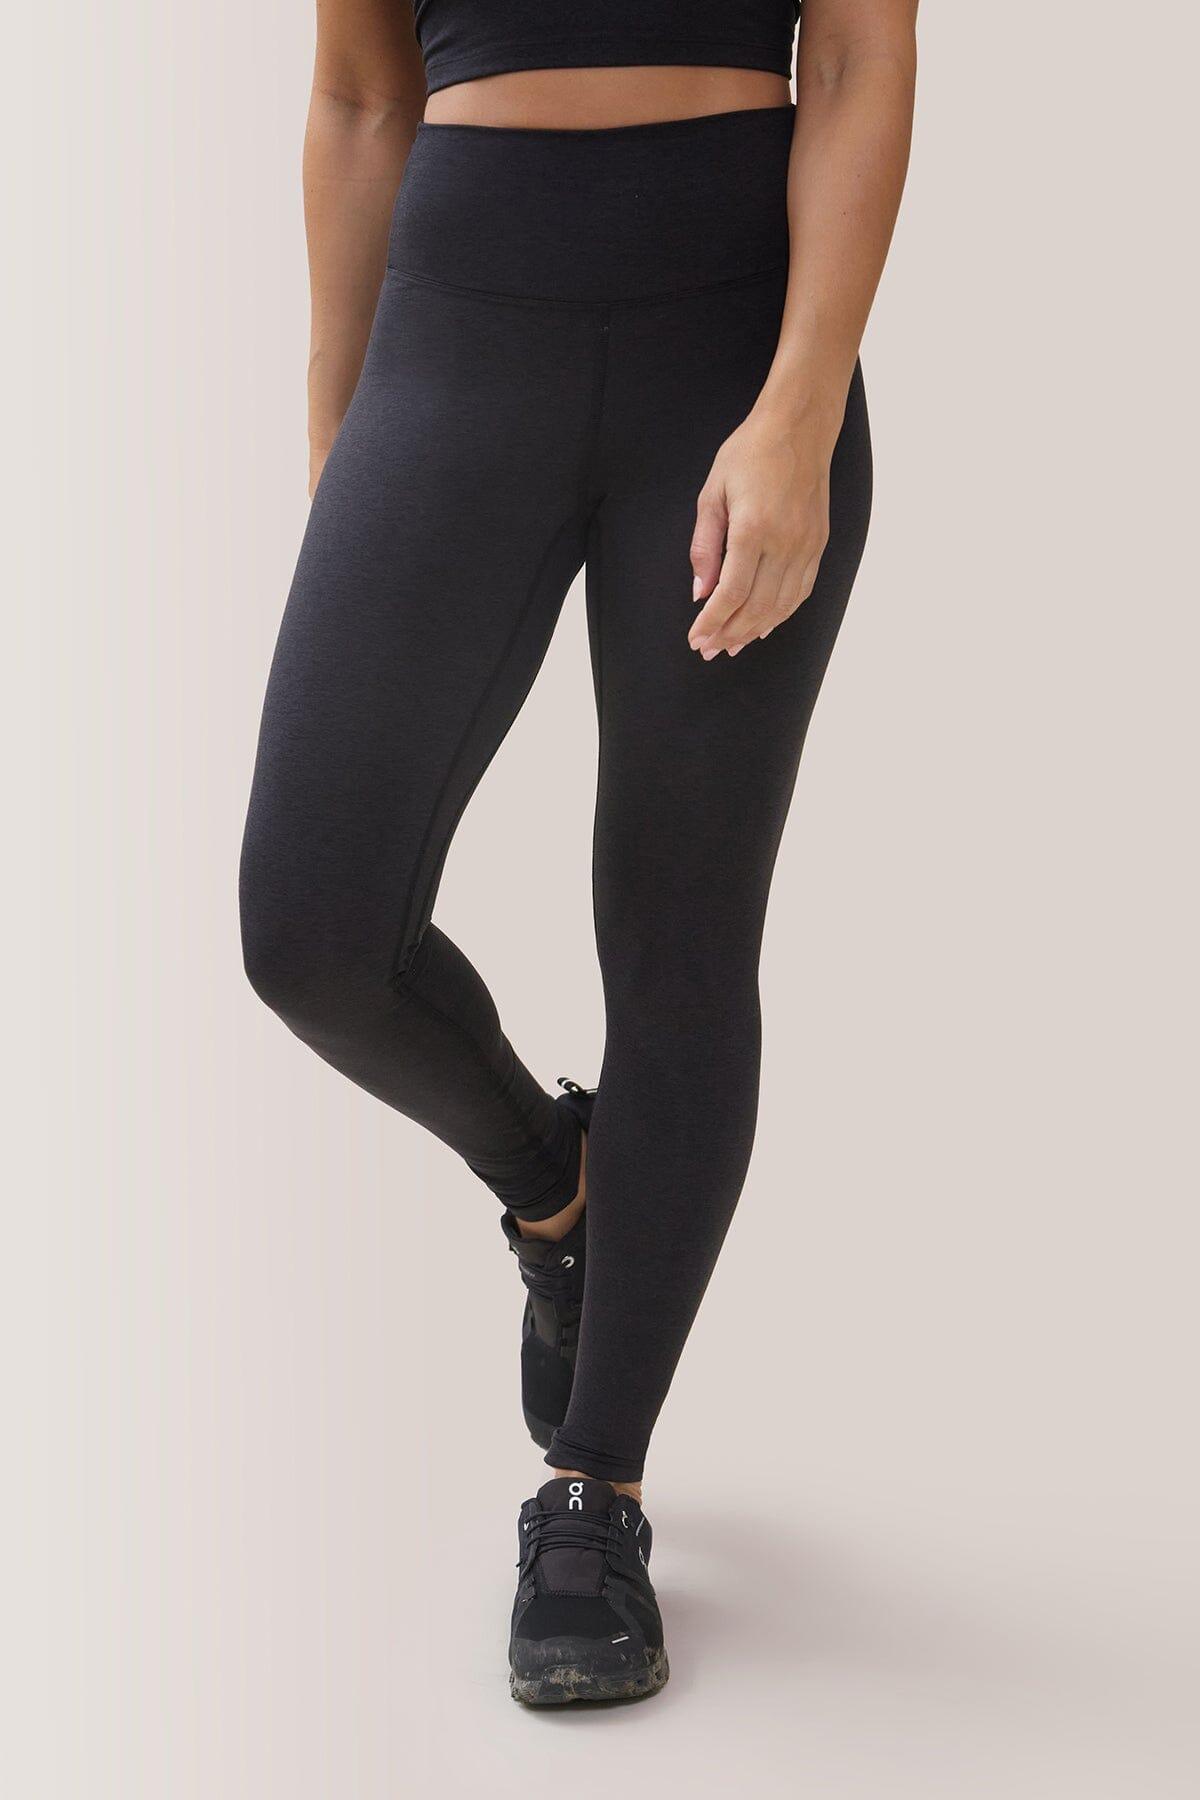 Femme qui porte les leggings taille-haute Buttery Soft BFF de Rose Boreal./ Womean wearing the Buttery Soft BFF High-Rise Legging from Rose Boreal. -Total Eclipse